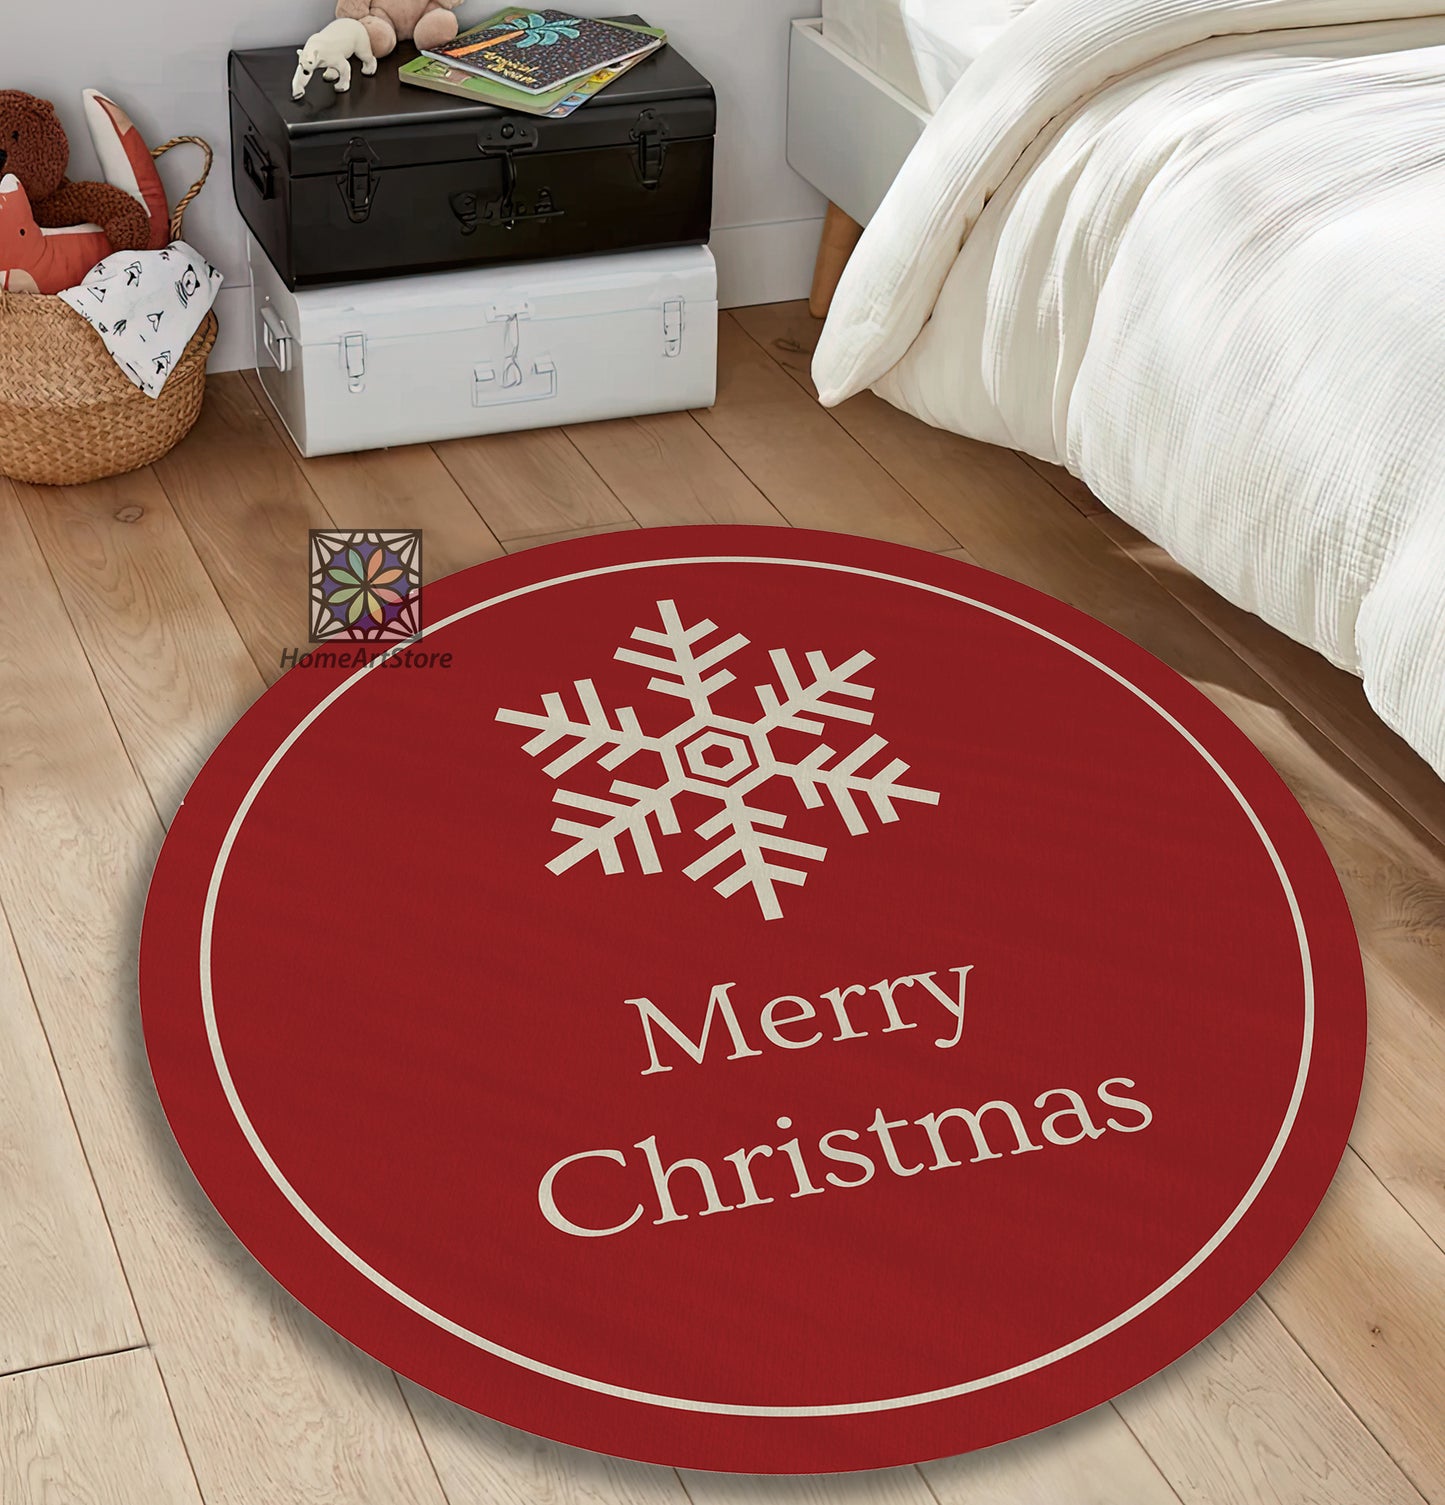 Merry Christmas Rug, Christmas Round Mat, Noel Carpet, Holiday Decor, Party Gift